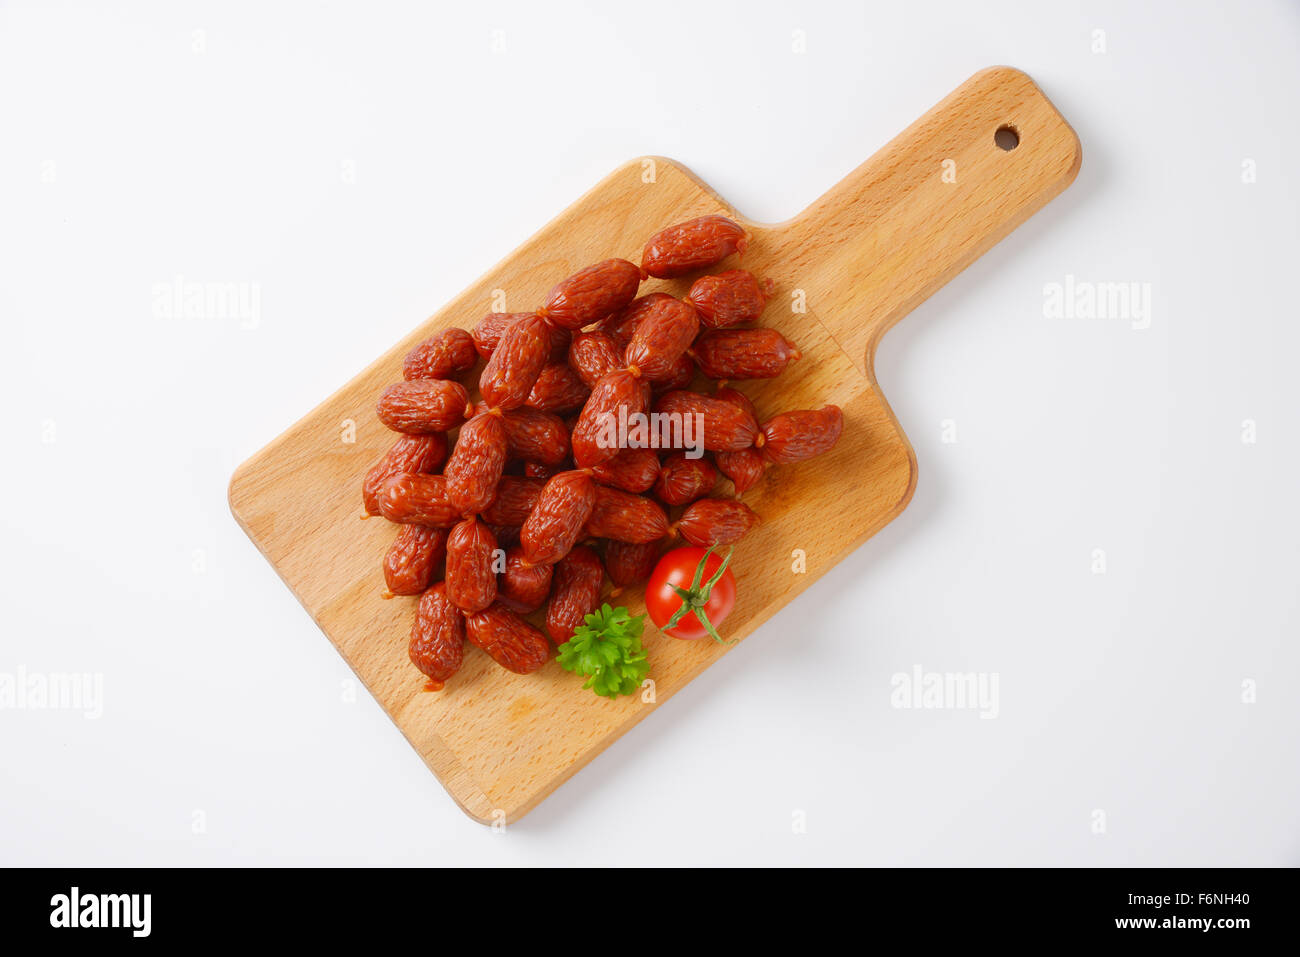 chain of mini sausages on wooden cutting board Stock Photo